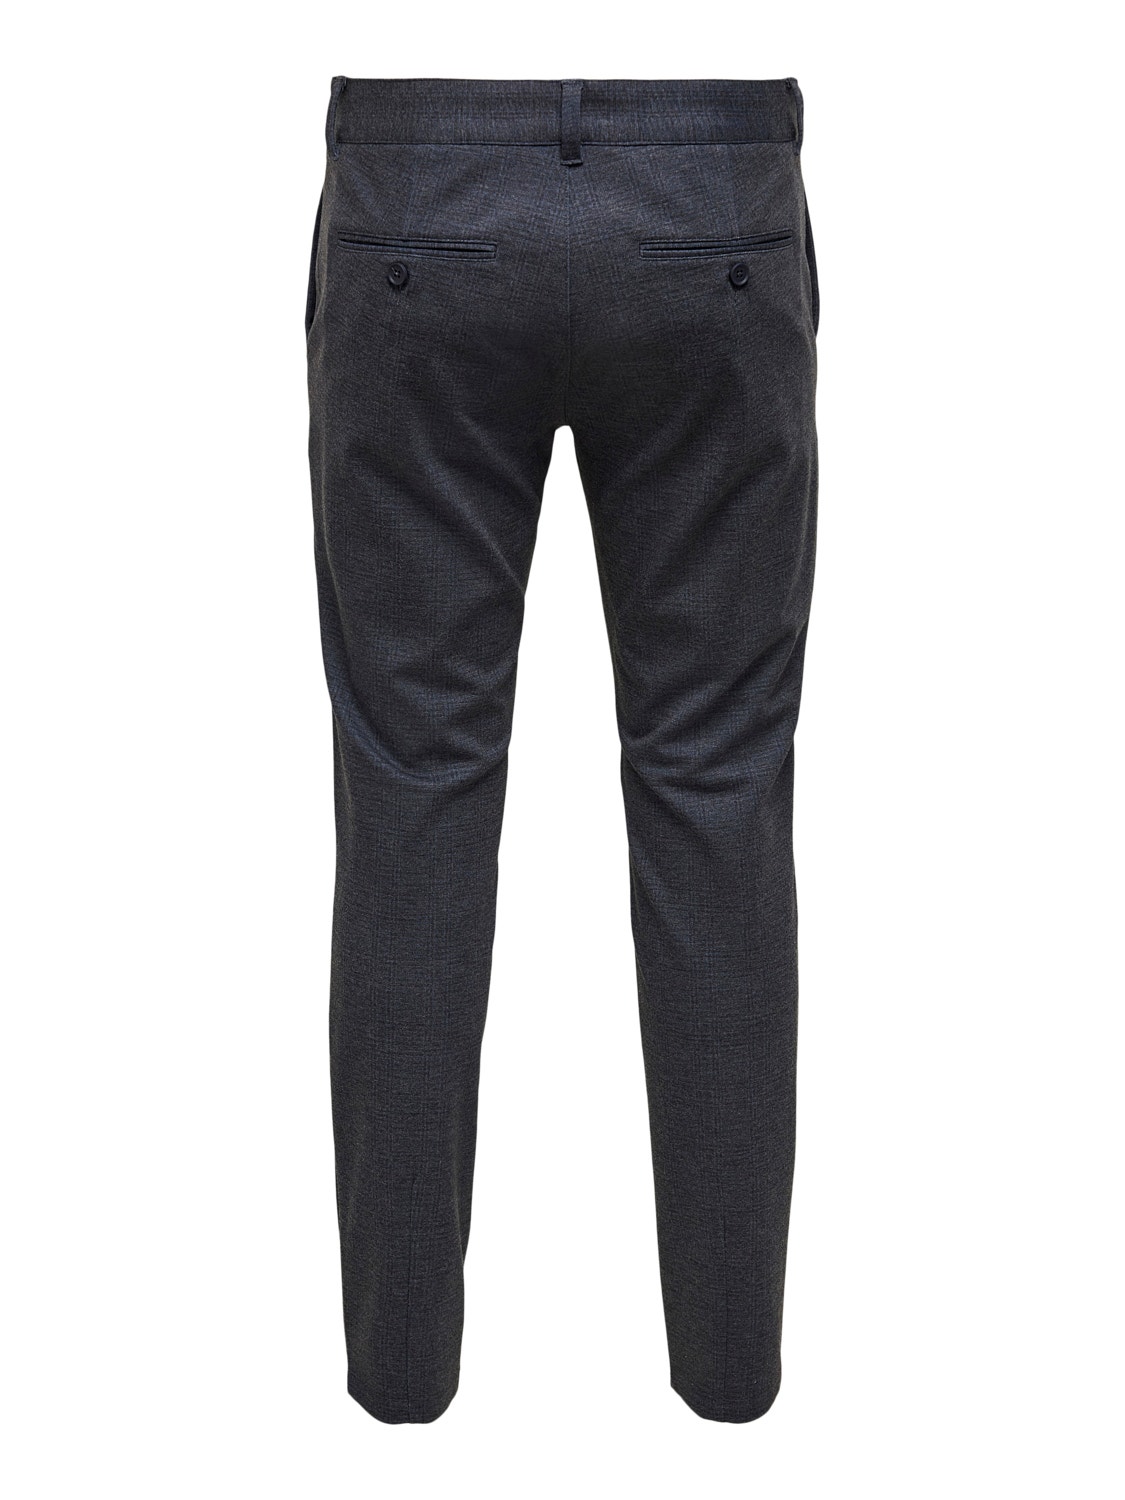 ONLY & SONS Basic trousers -Dark Navy - 22020391